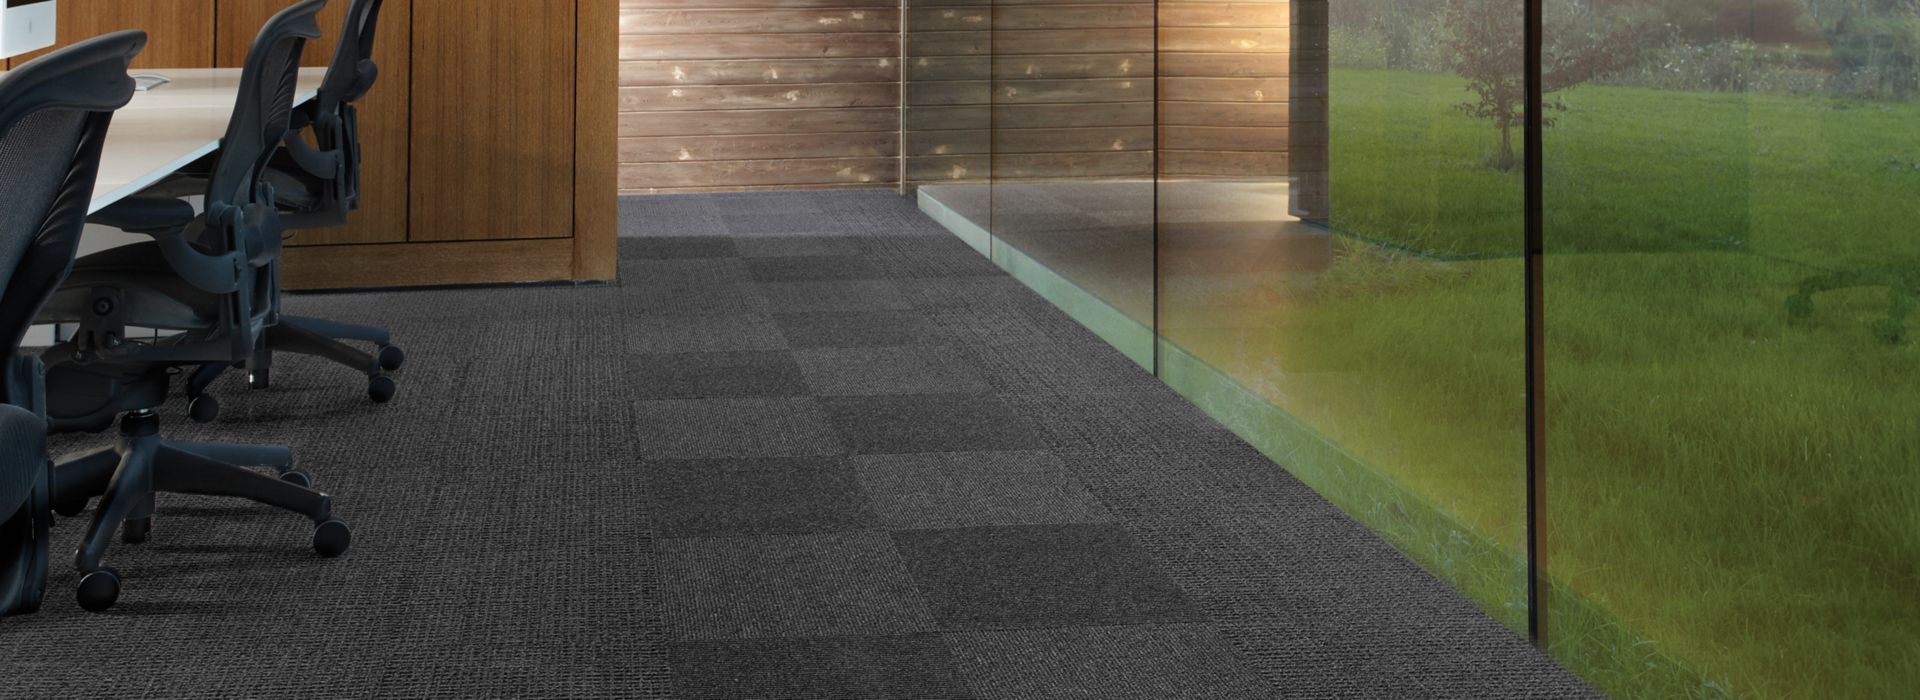 Interface UR202 and UR203 carpet tile in conference room with glass wall